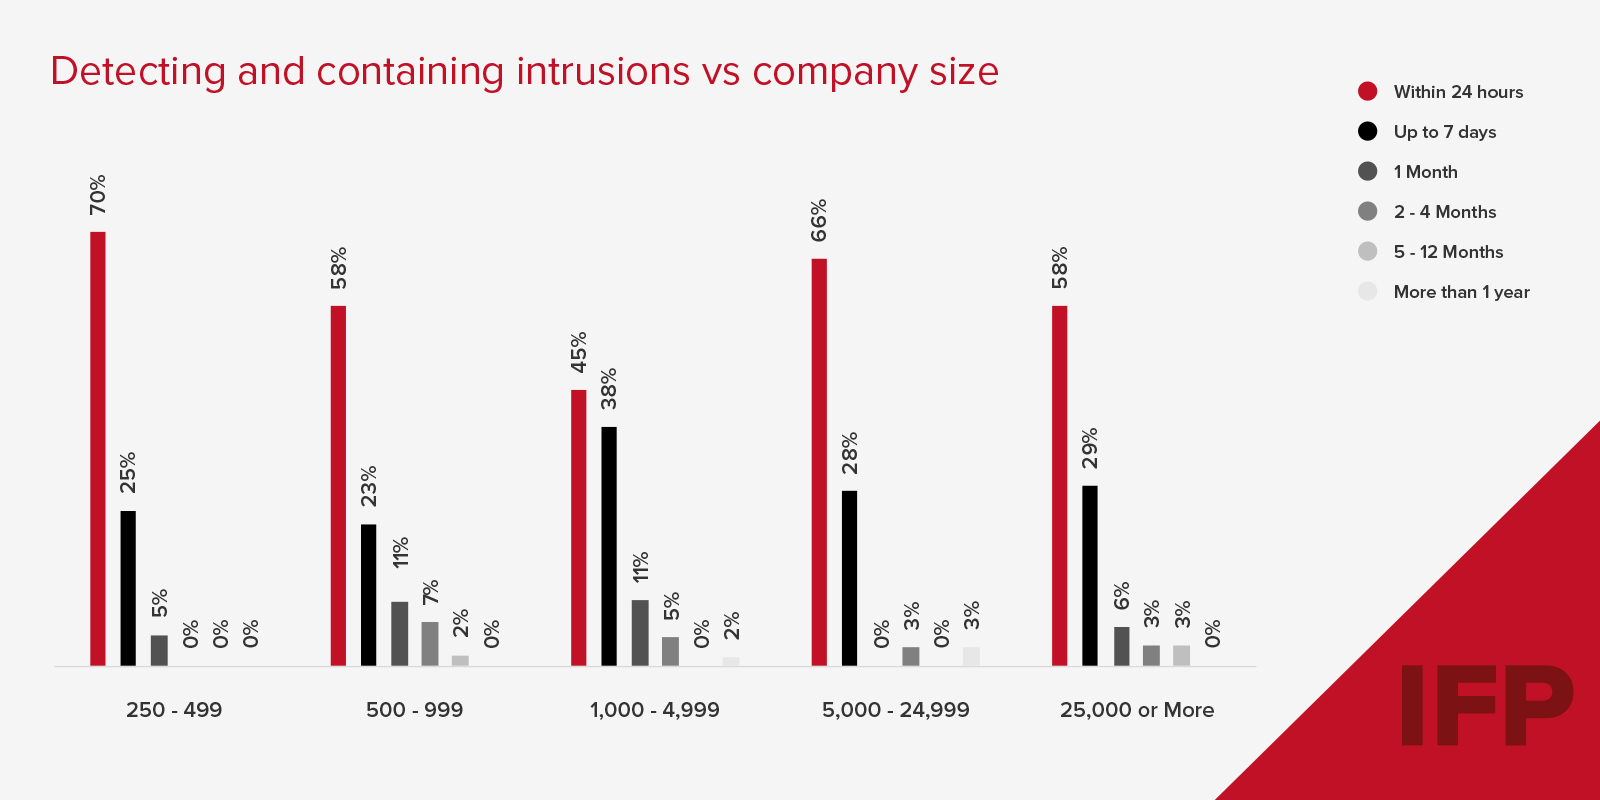 IFP research visual for the time it takes to detect an intrusion vs company size